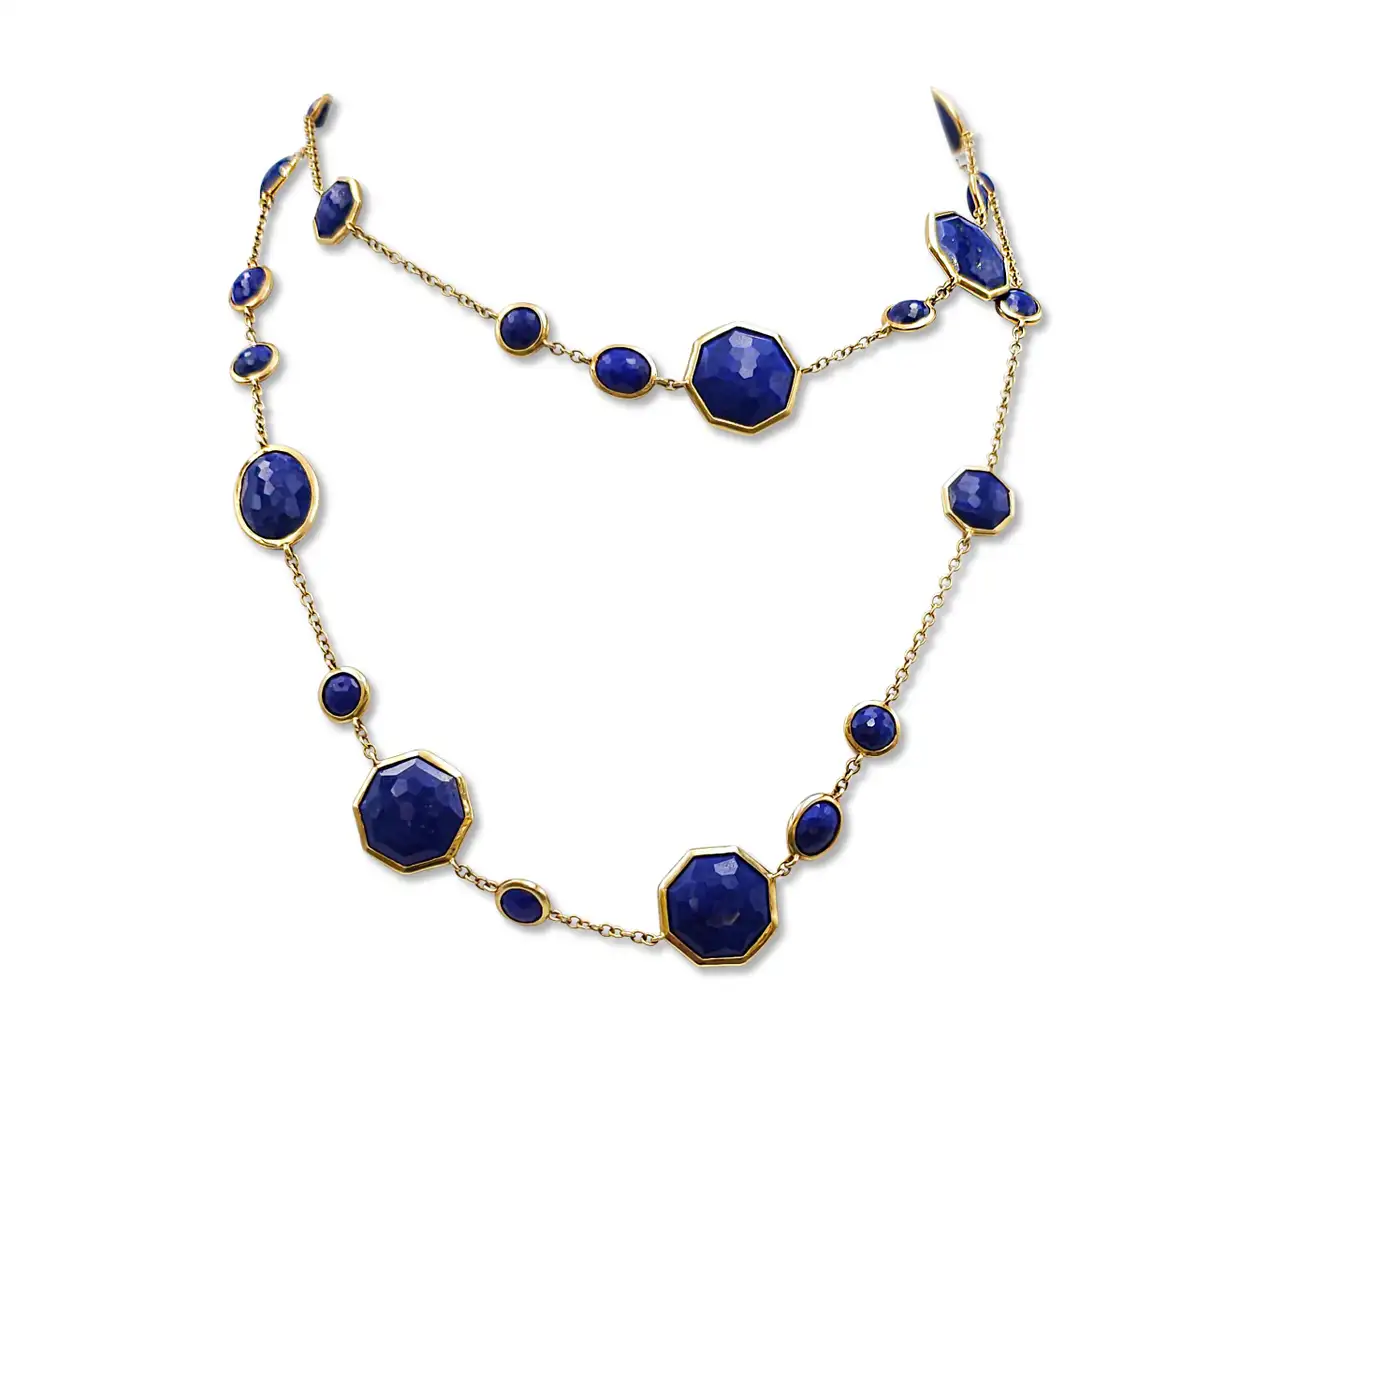 Ippolita-Rock-Sweets-Lolly-Gold-and-Lapis-Necklace-7.webp